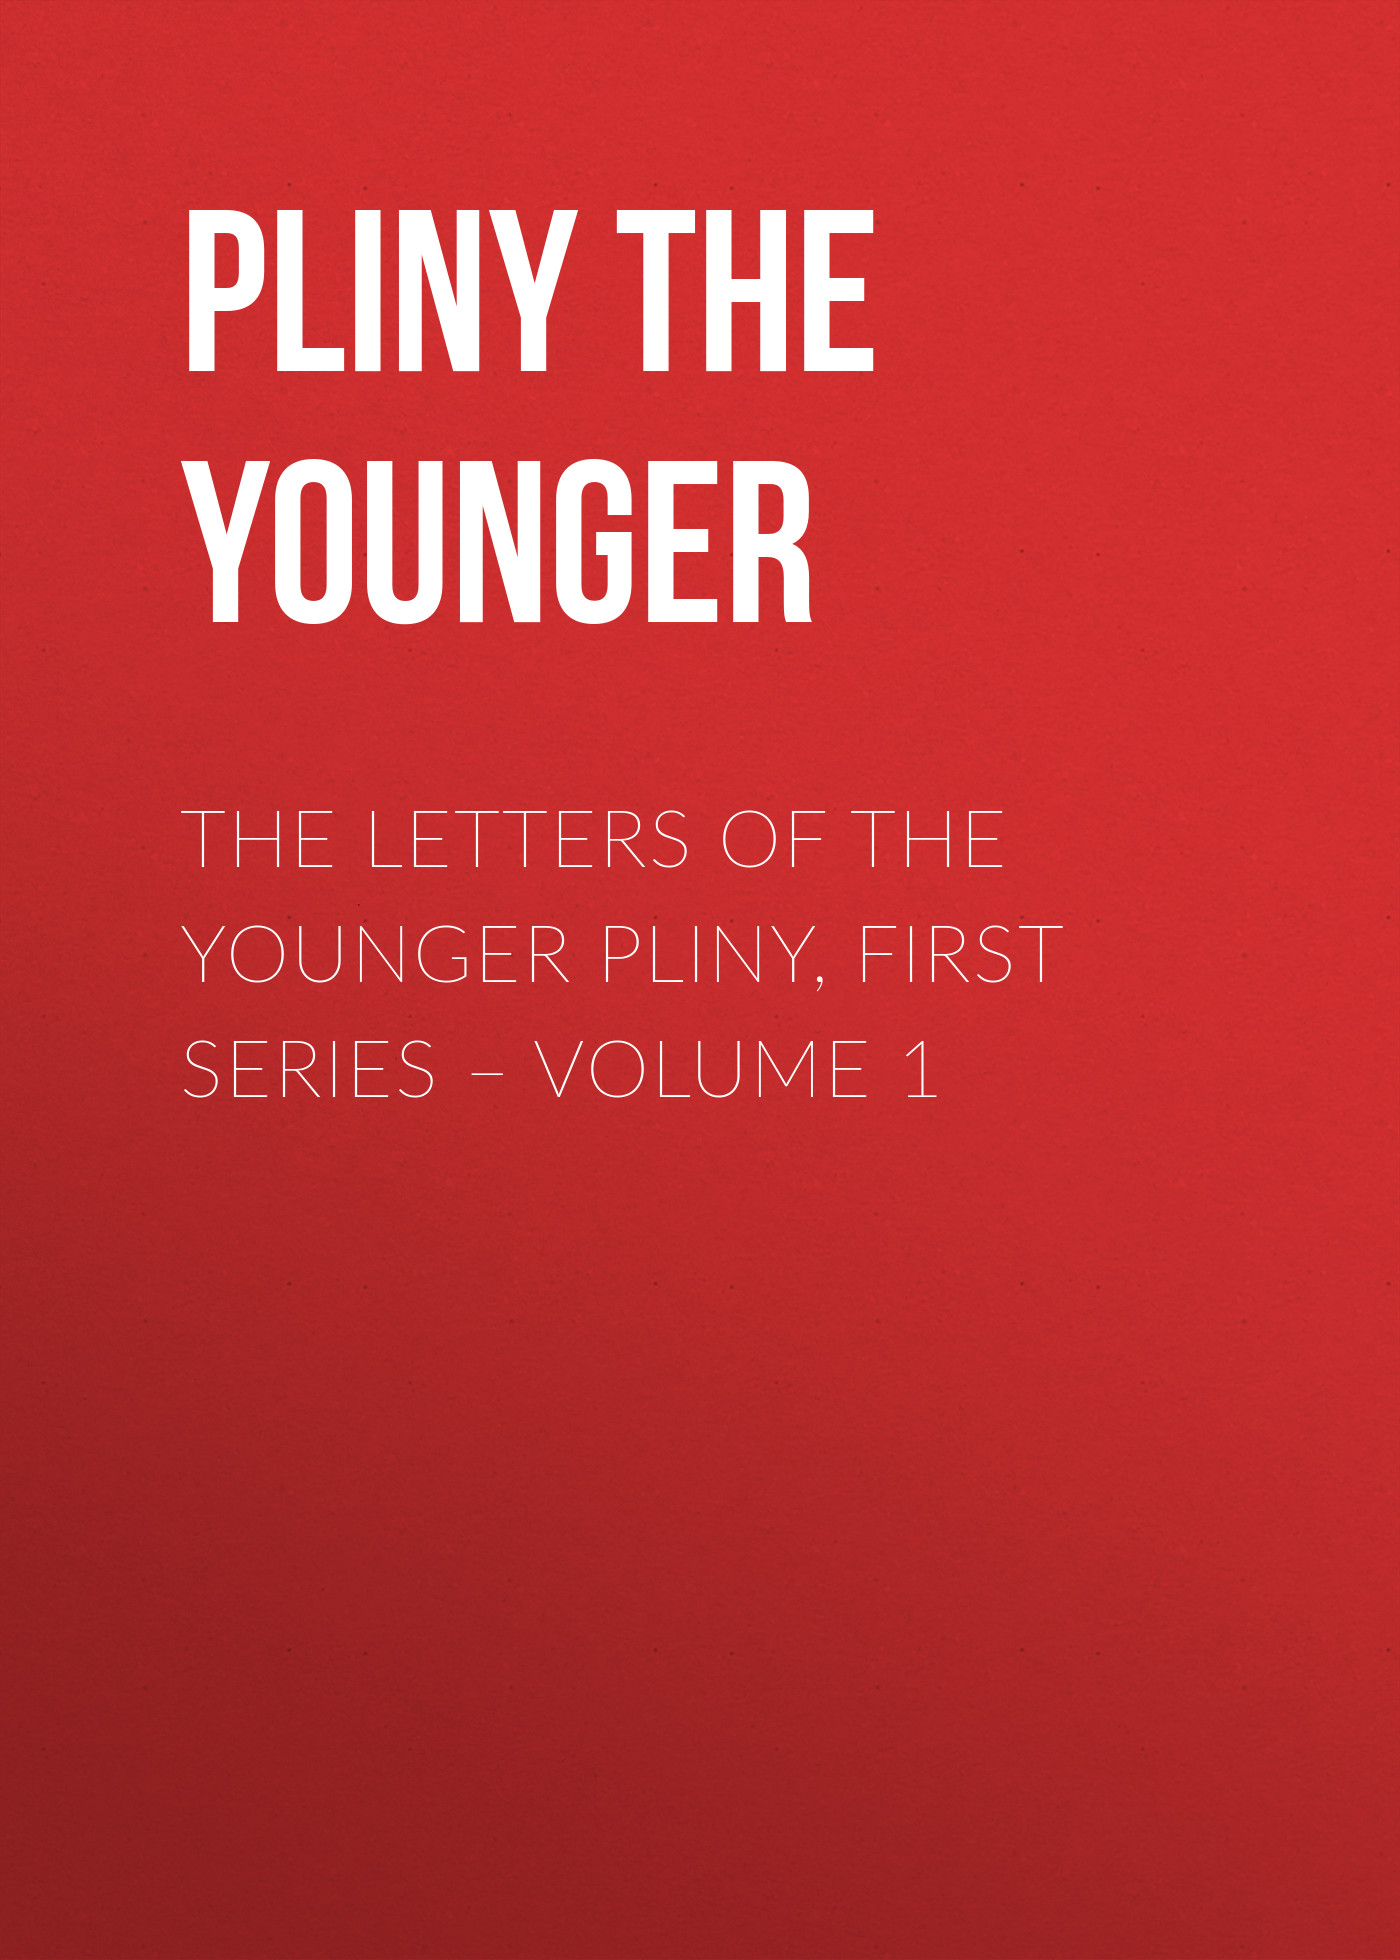 The Letters of the Younger Pliny, First Series– Volume 1